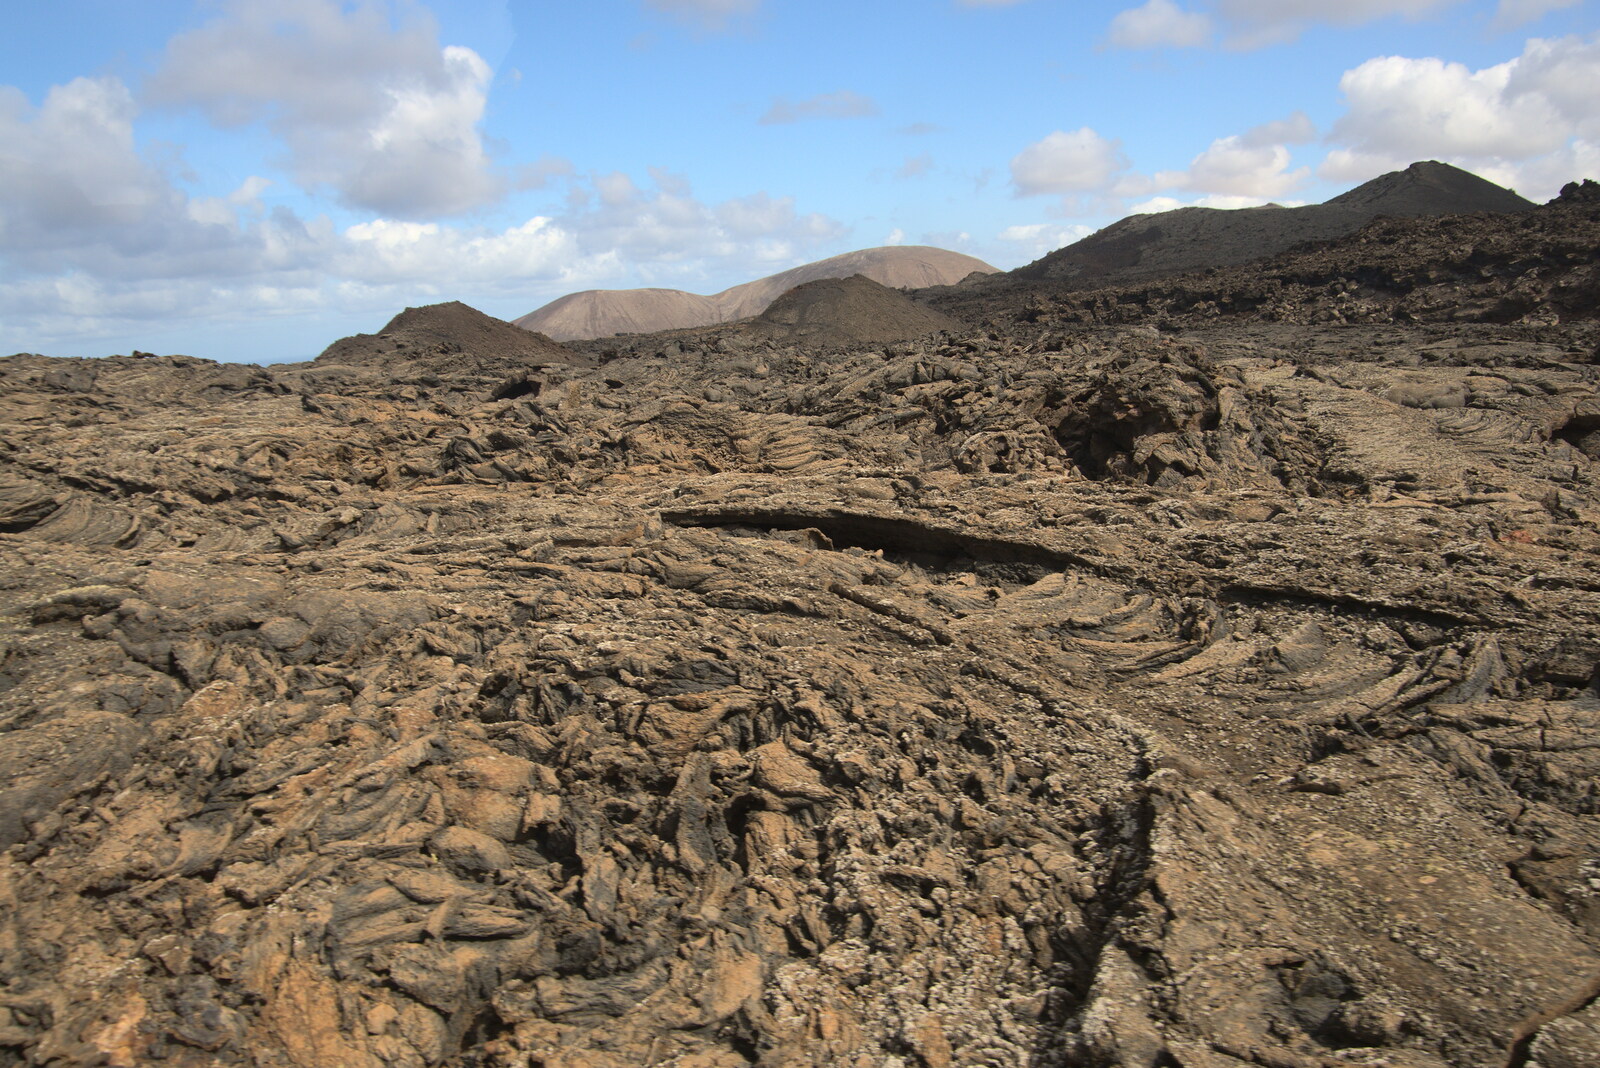 The madness of lava flows from The Volcanoes of Lanzarote, Canary Islands, Spain - 27th October 2021